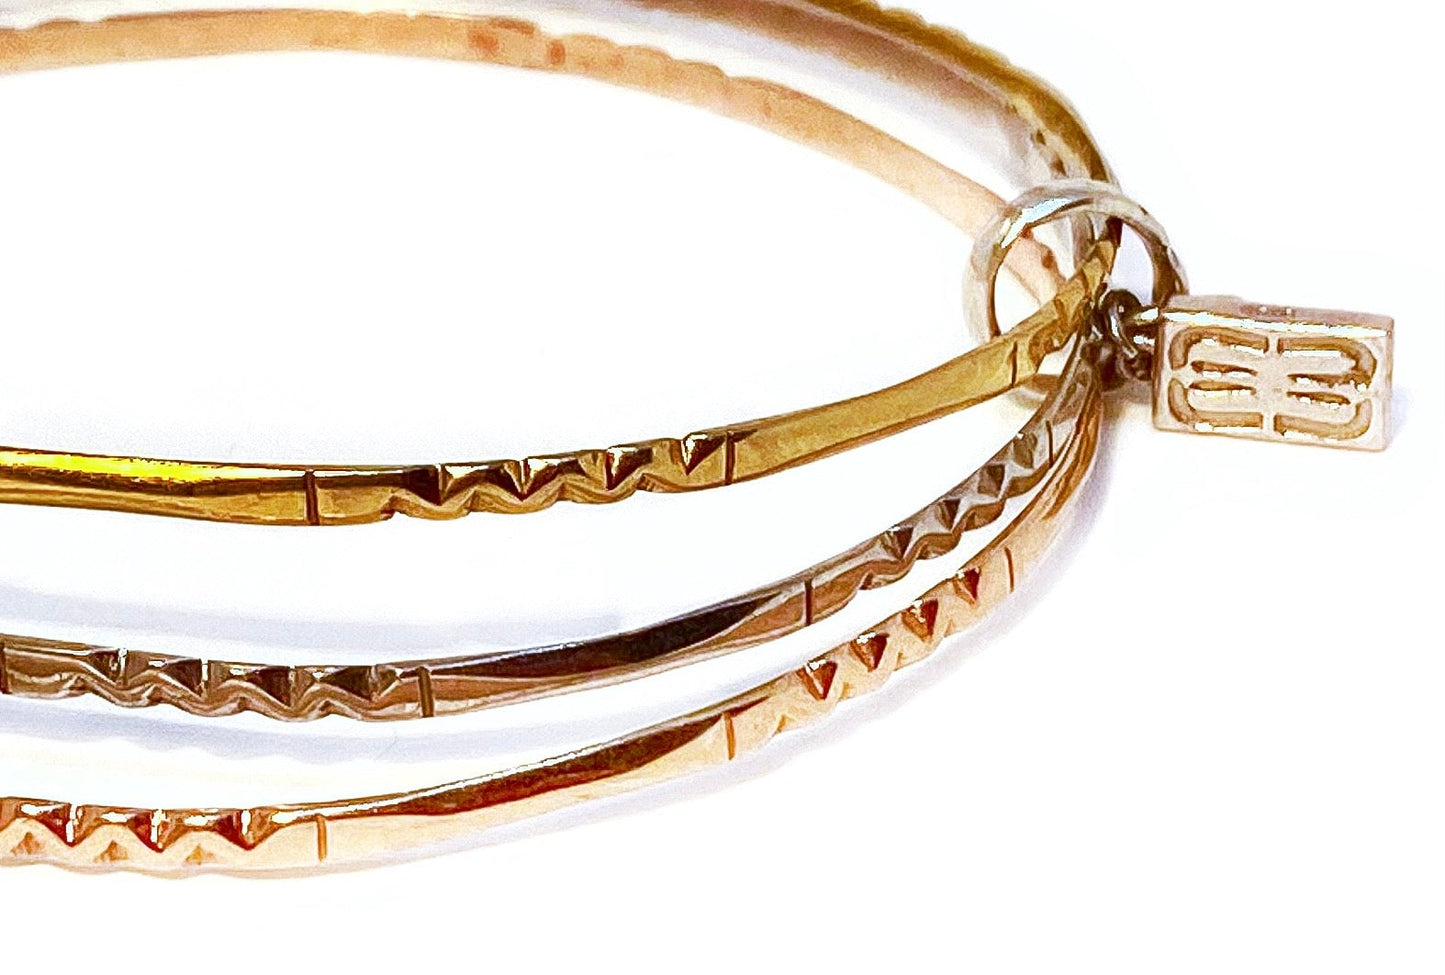 Yellow, Rose & White Gold 18Kt Vermeil Bangle Bracelet with Double Luck Charm